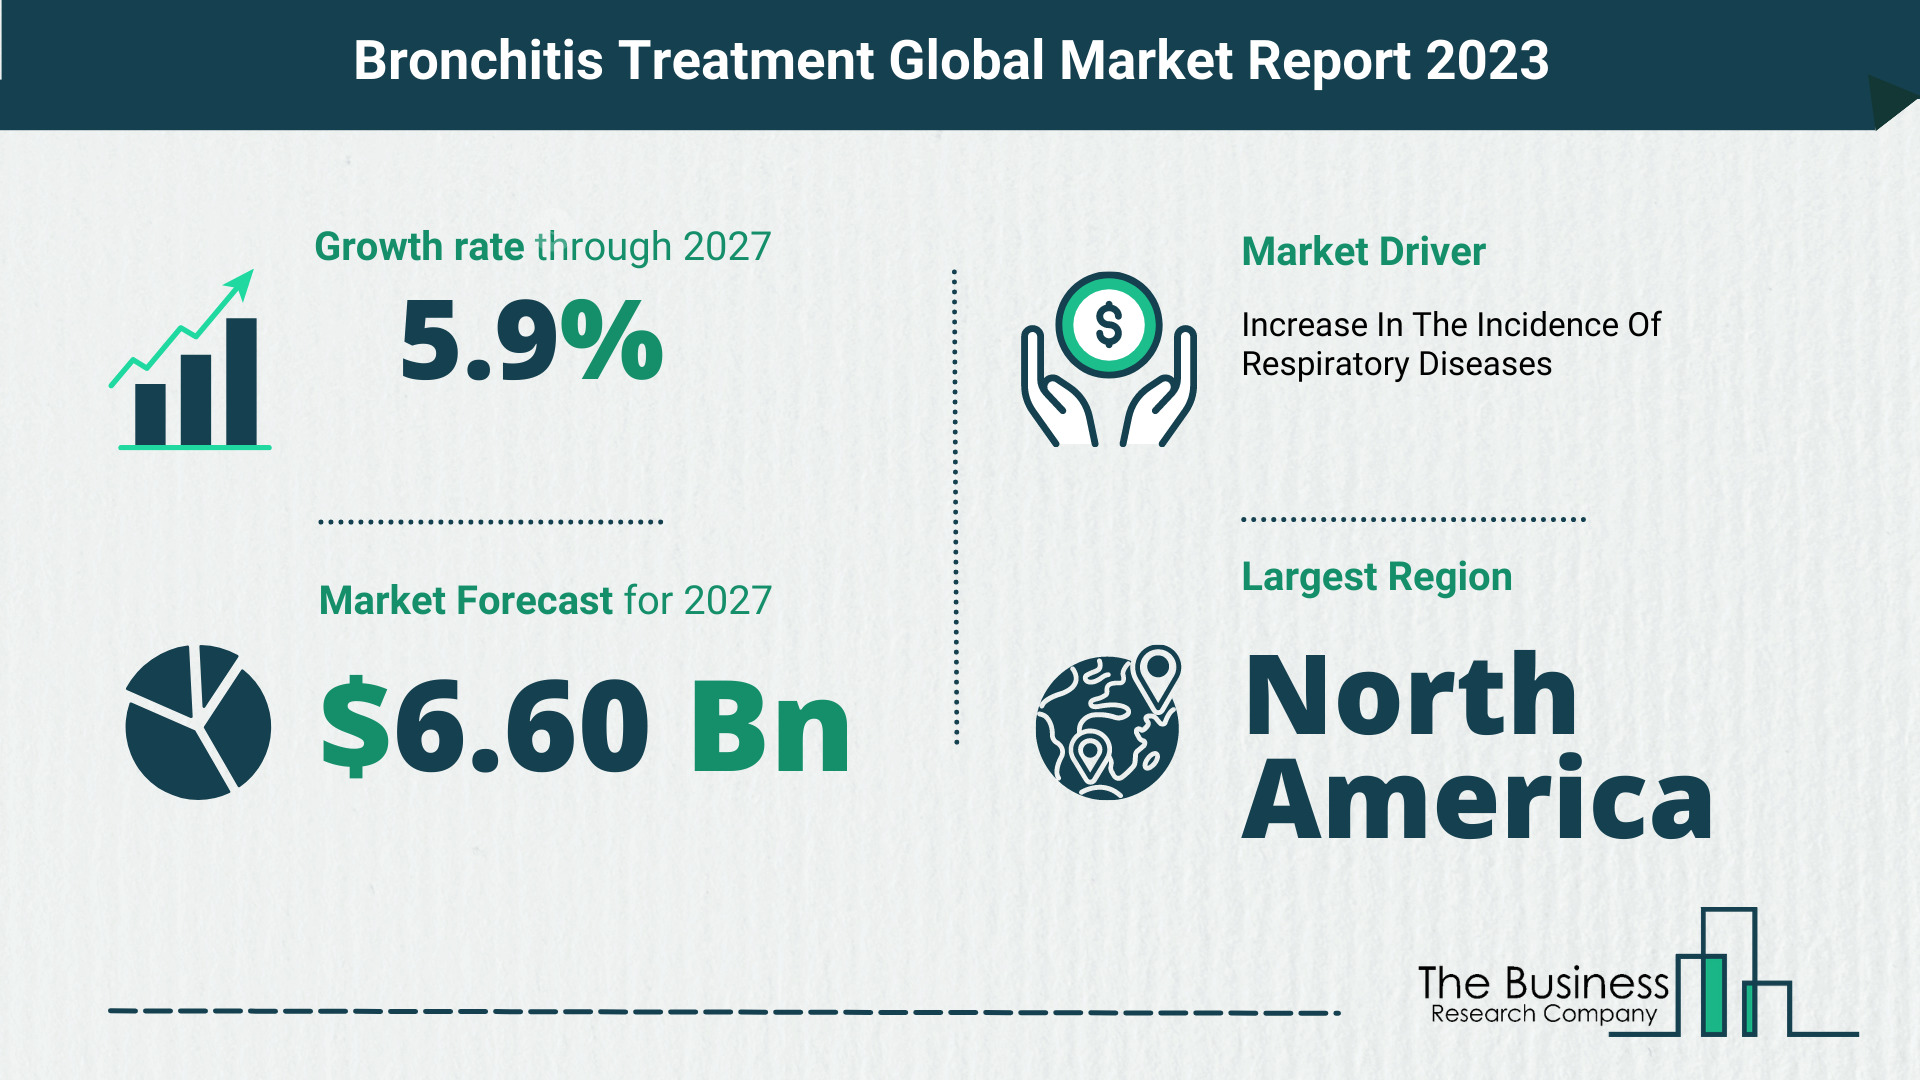 Global Bronchitis Treatment Market Opportunities And Strategies 2023